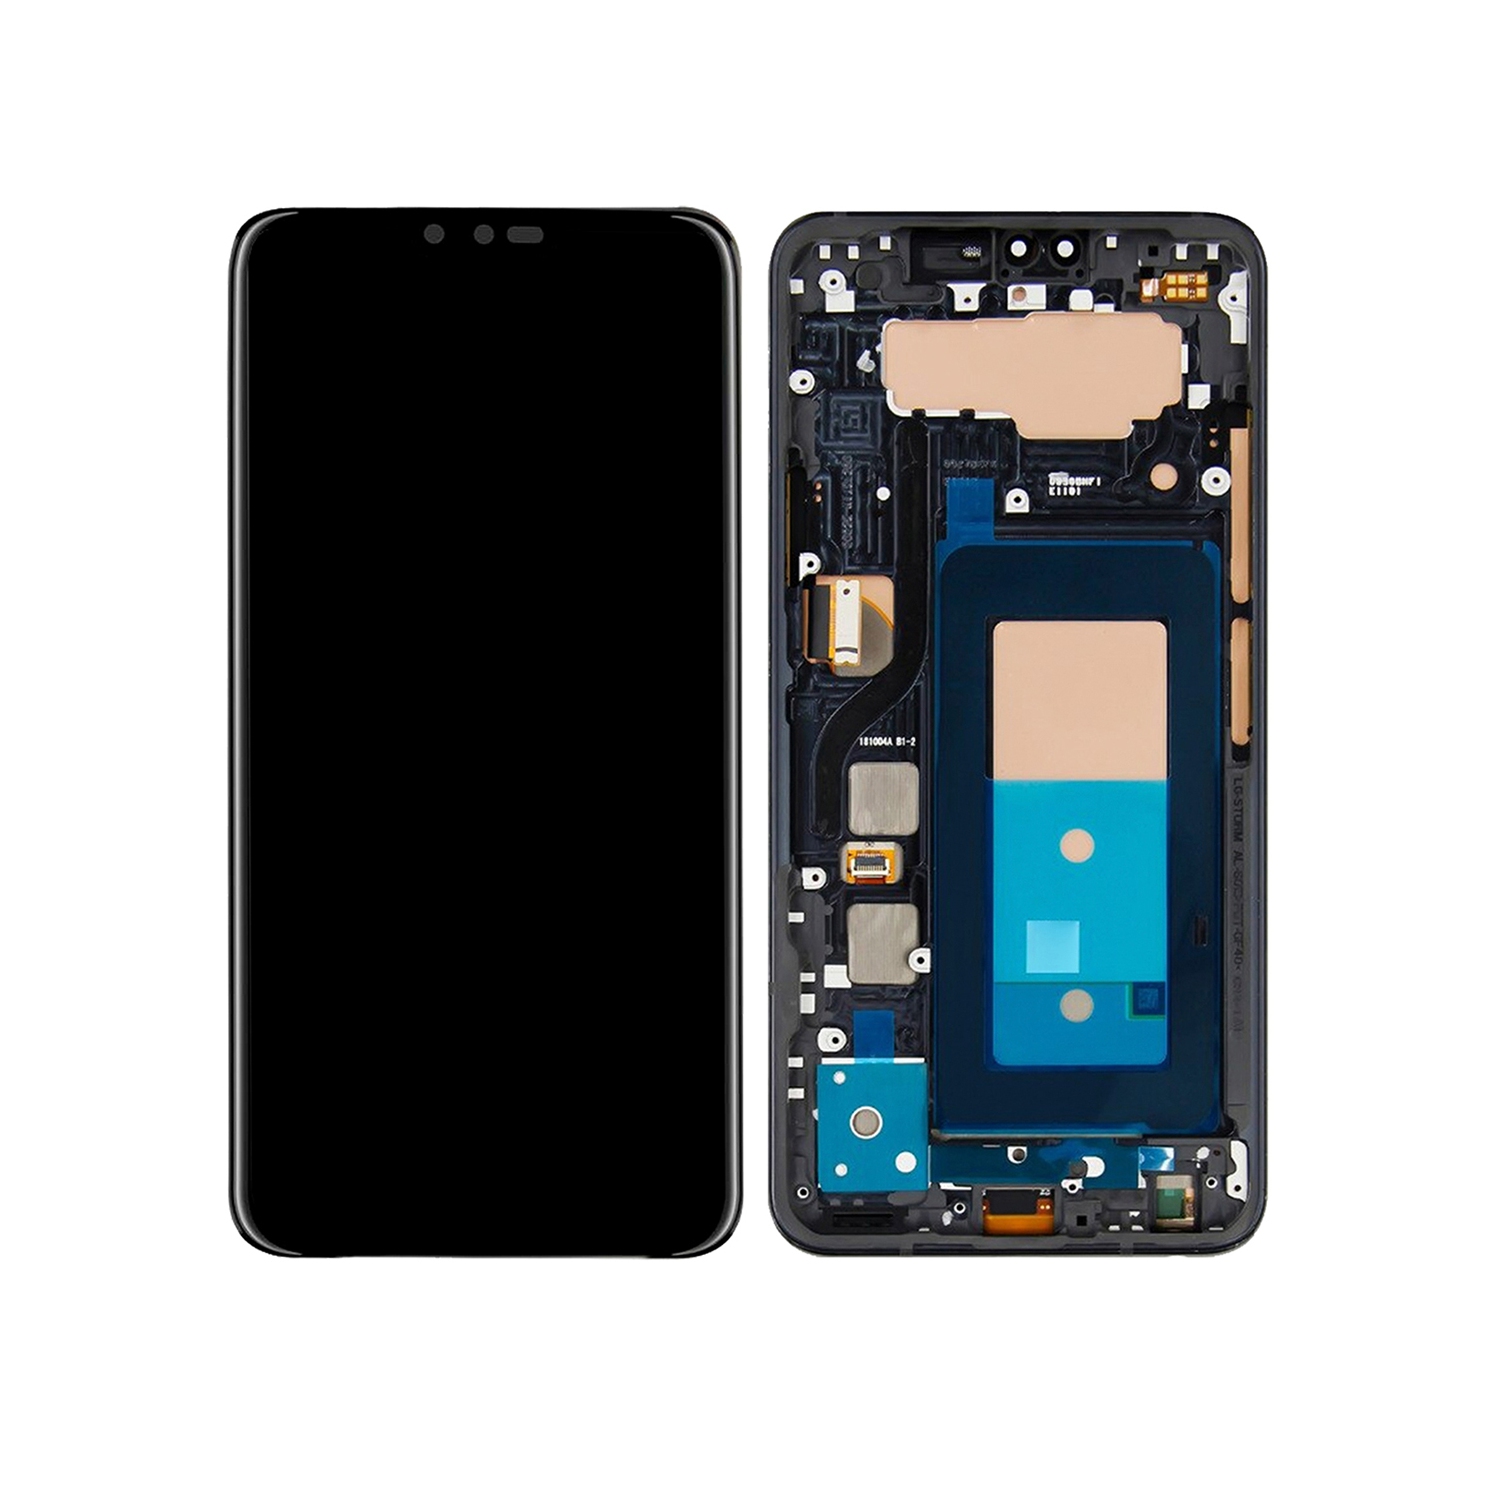 Refurbished (Excellent) - Replacement OLED Display Touch Screen Digitizer Assembly With Frame For LG V40 ThinQ - Black